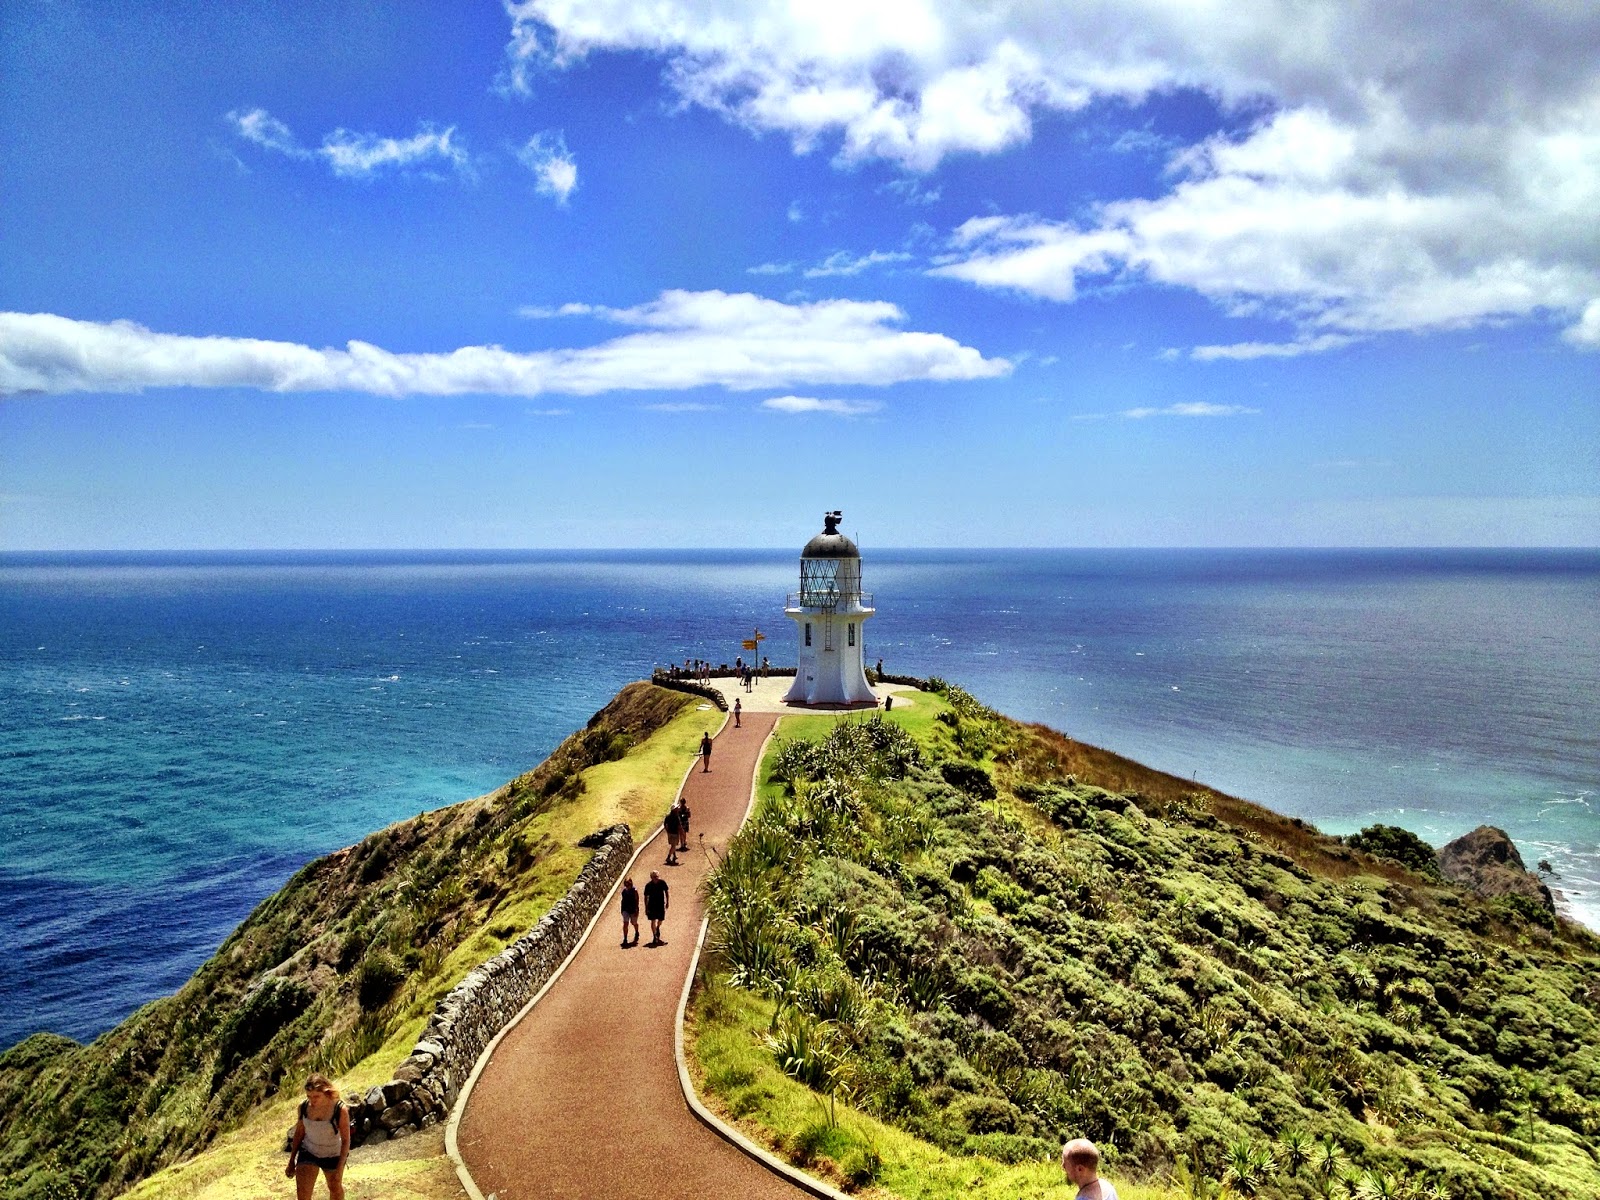 Cape Reinga - the most Northerly point of New Zealand